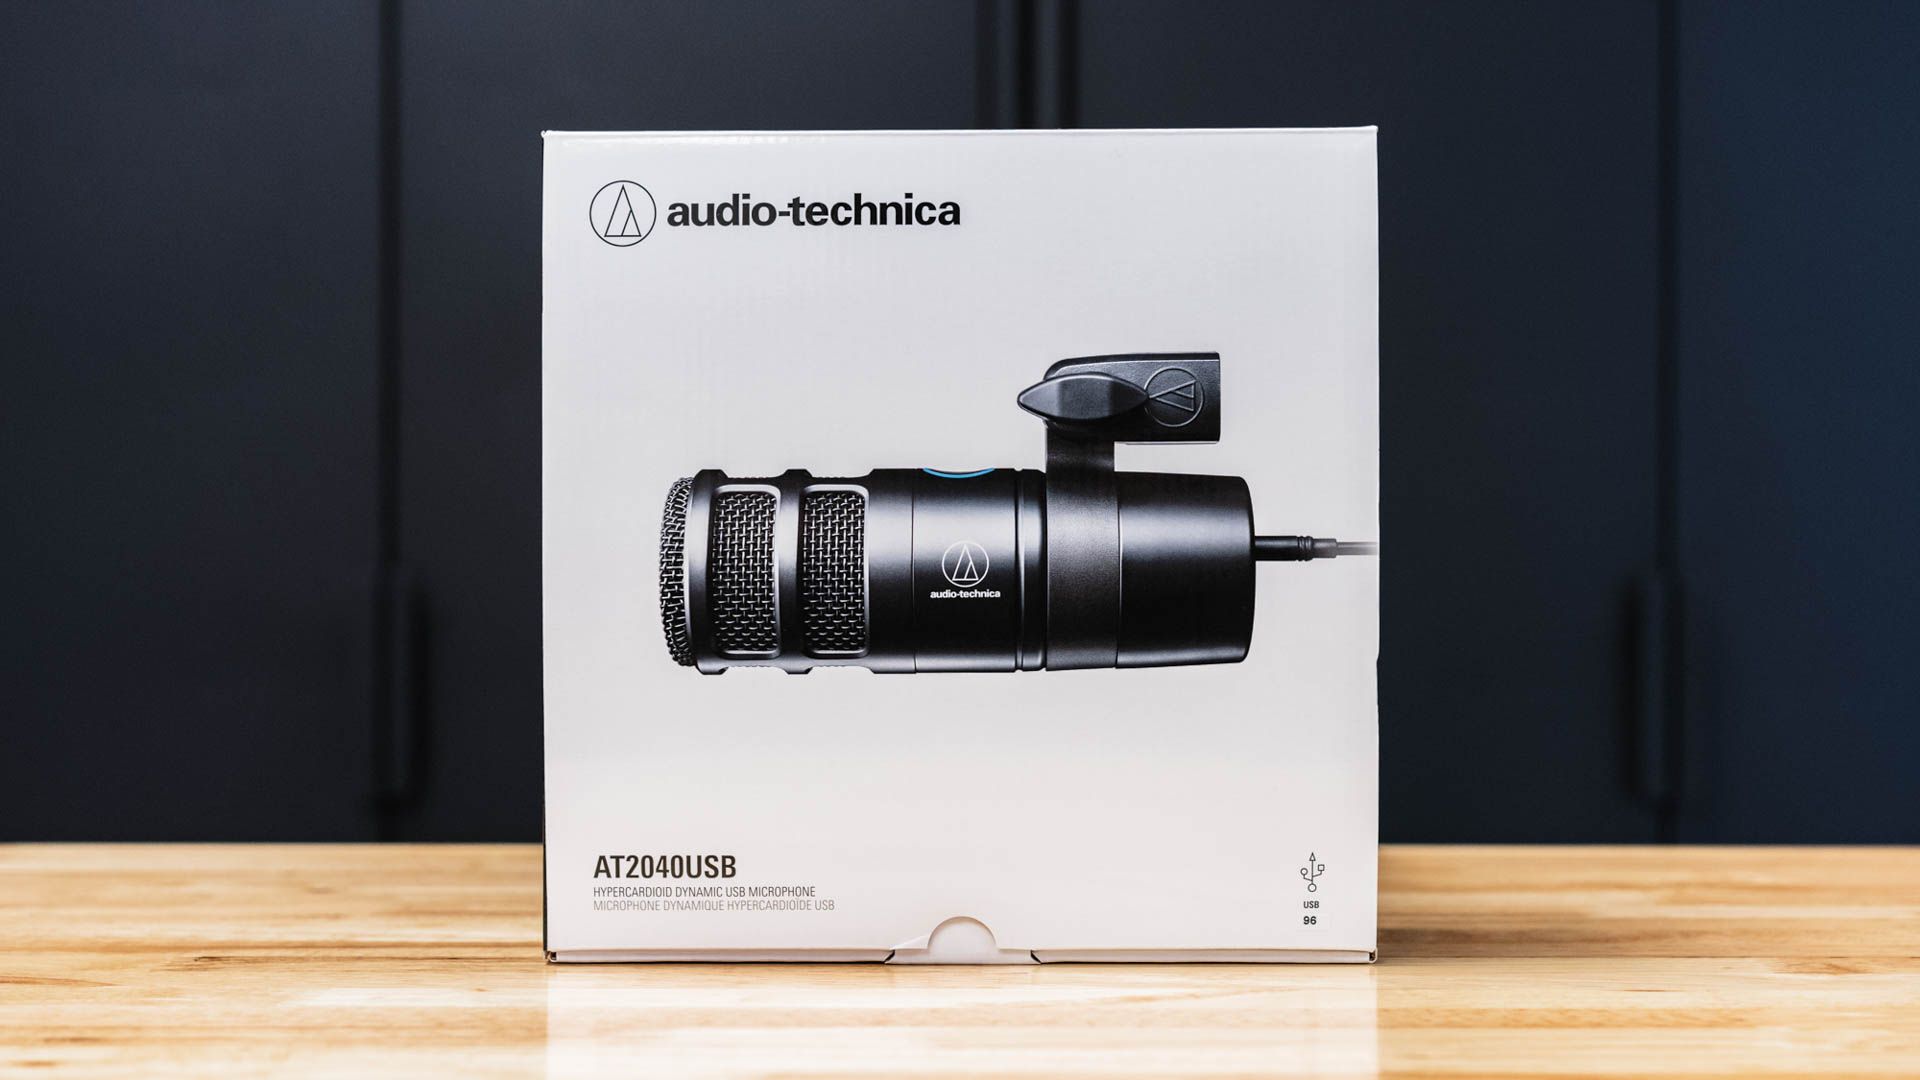 Packaging of the Audio-Technica AT2040USB Microphone